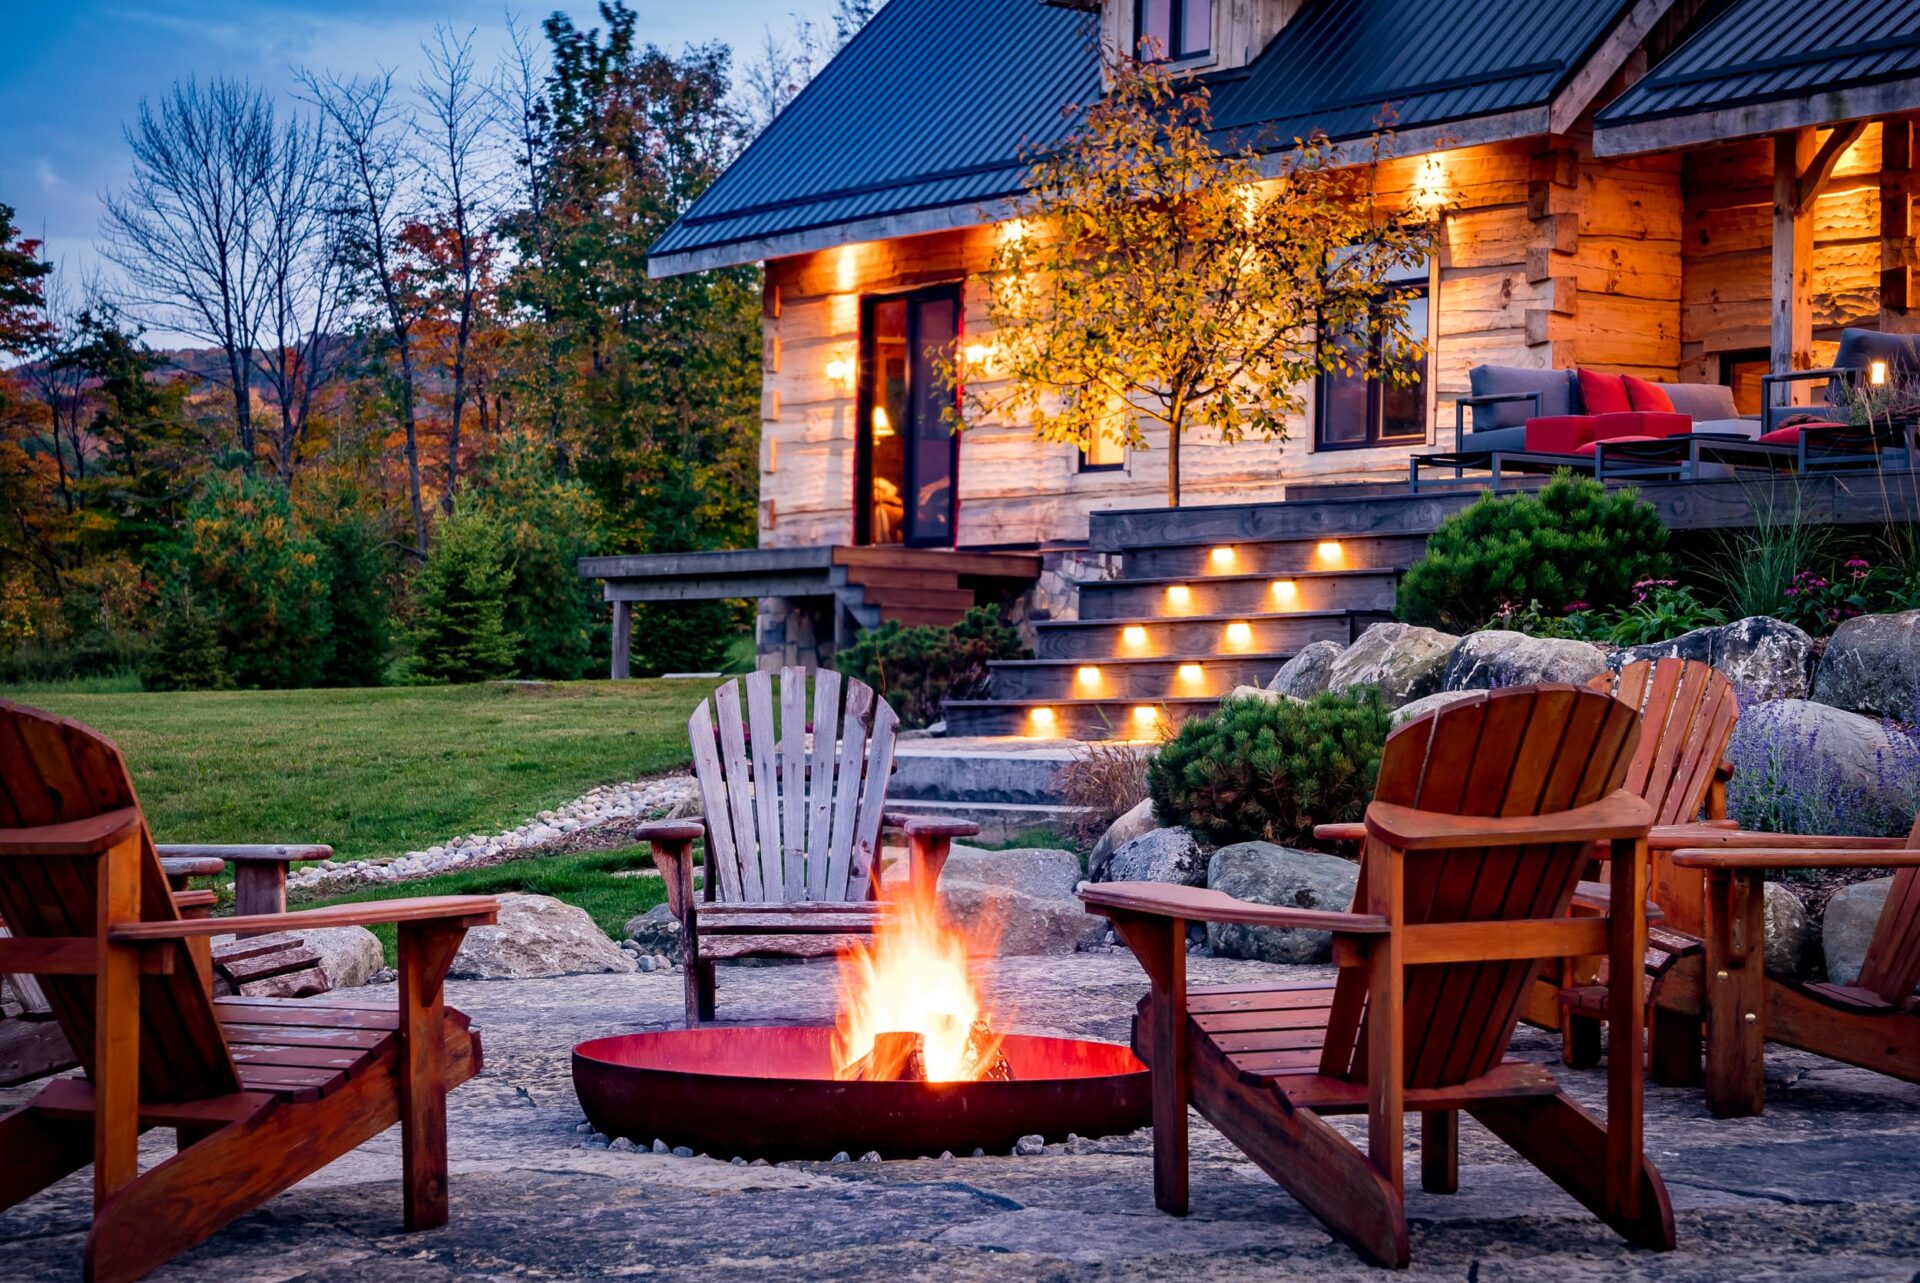 A cozy outdoor fire pit with wooden Adirondack chairs, illuminated steps leading to a rustic log cabin against a backdrop of autumnal trees.